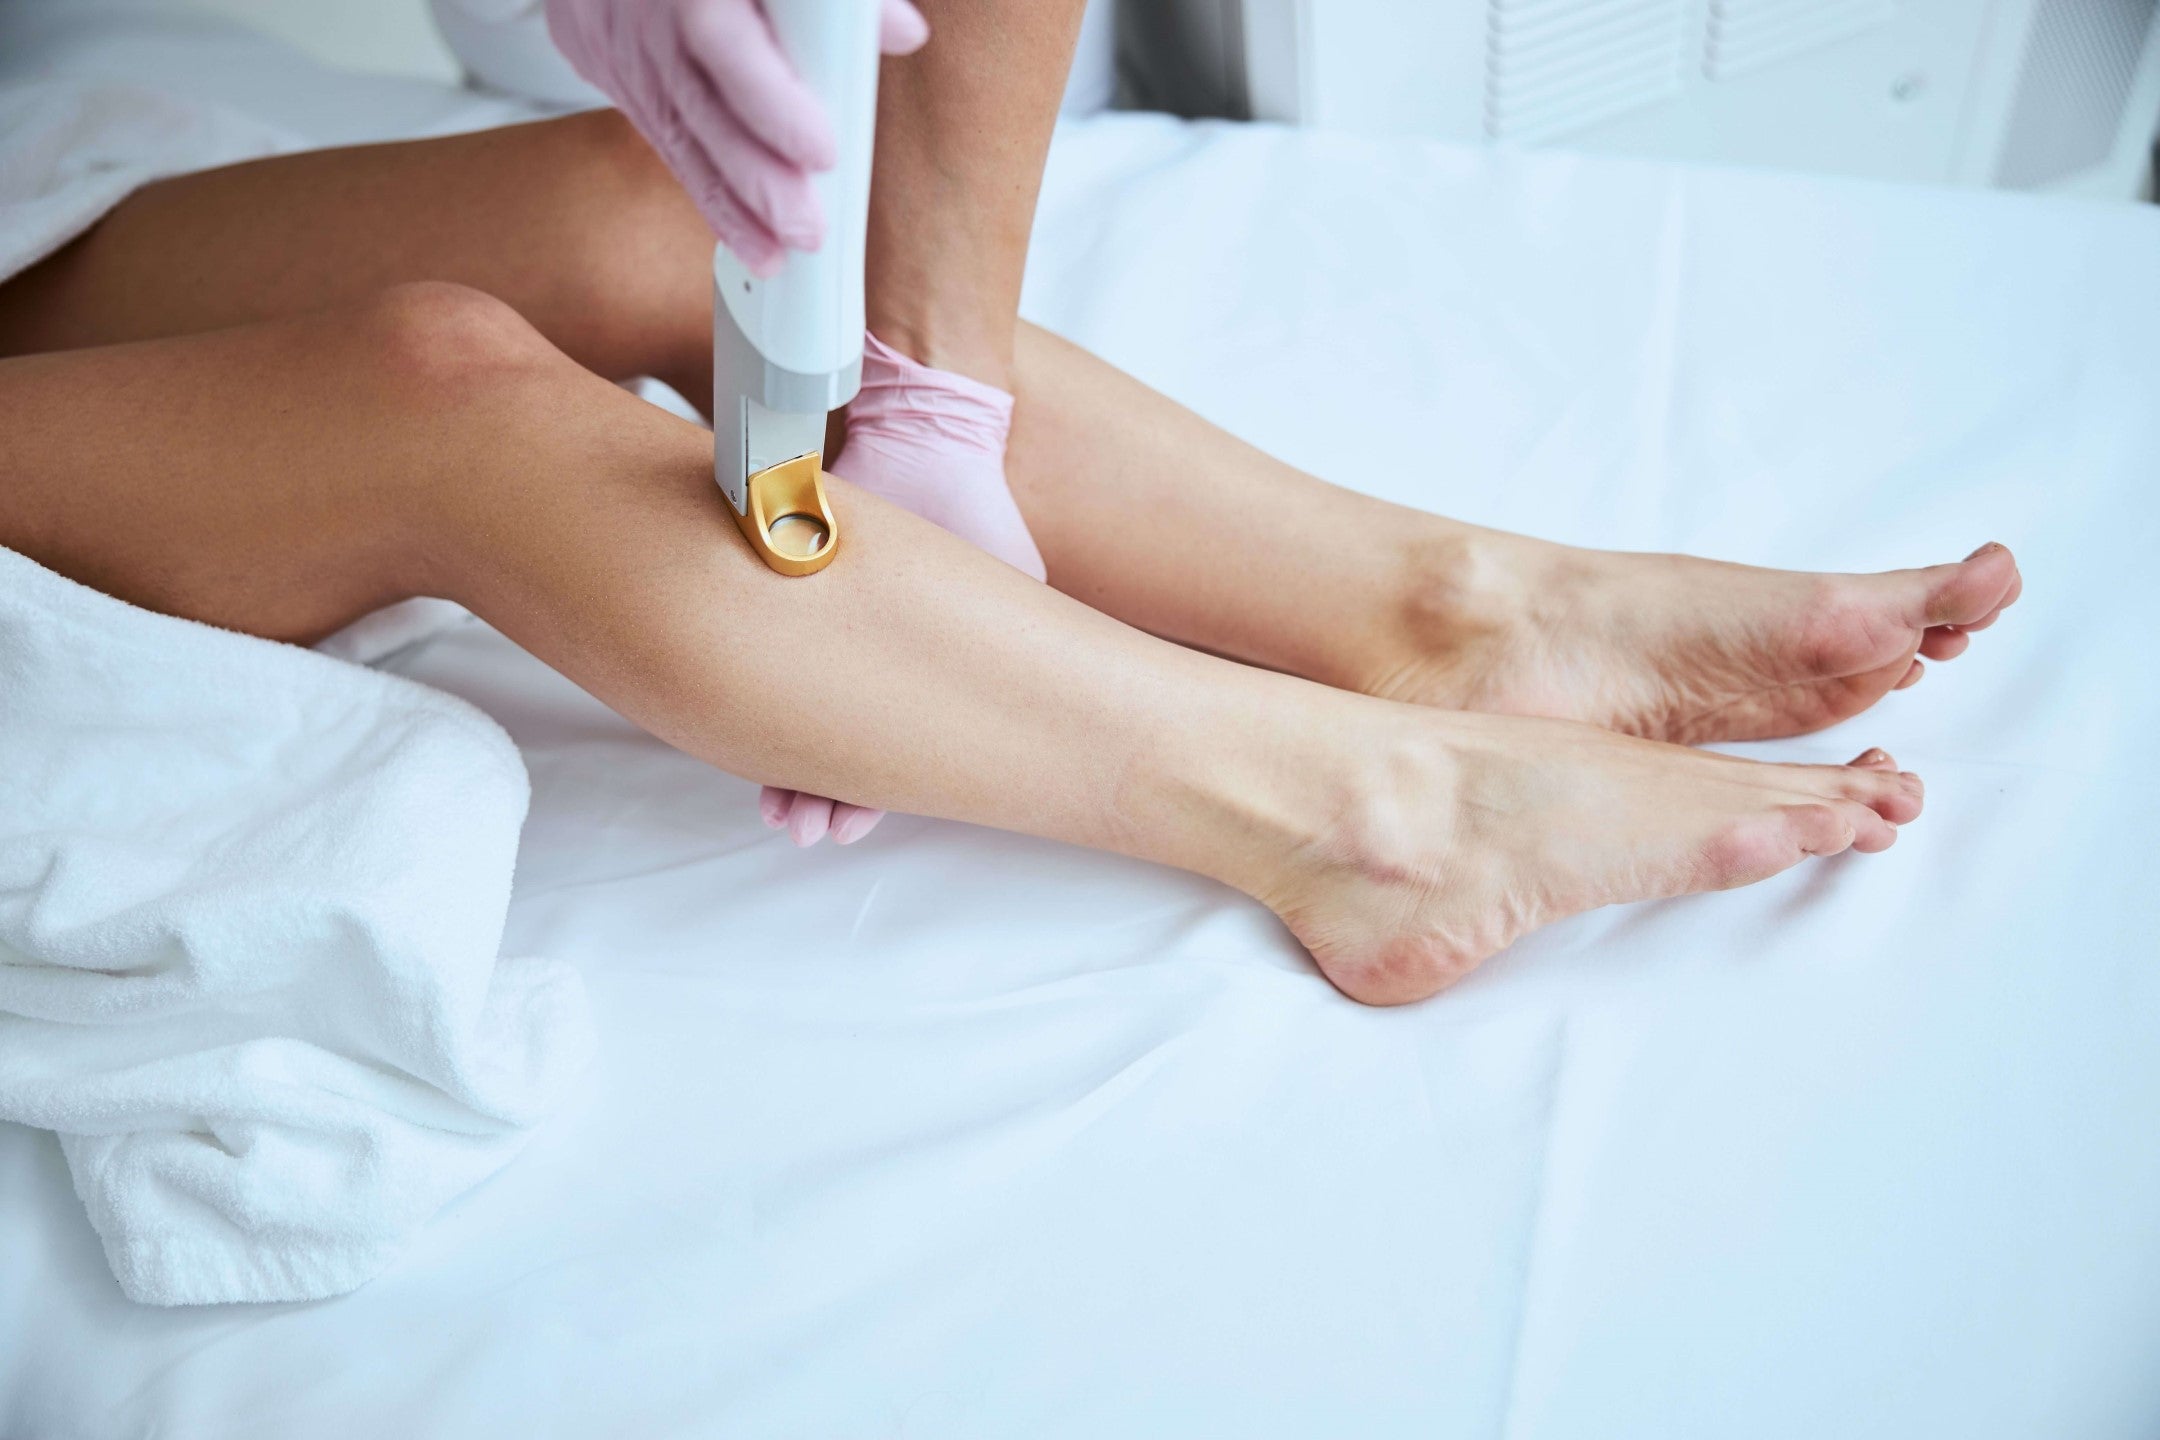 How Much Does Electrolysis Hair Removal Cost?